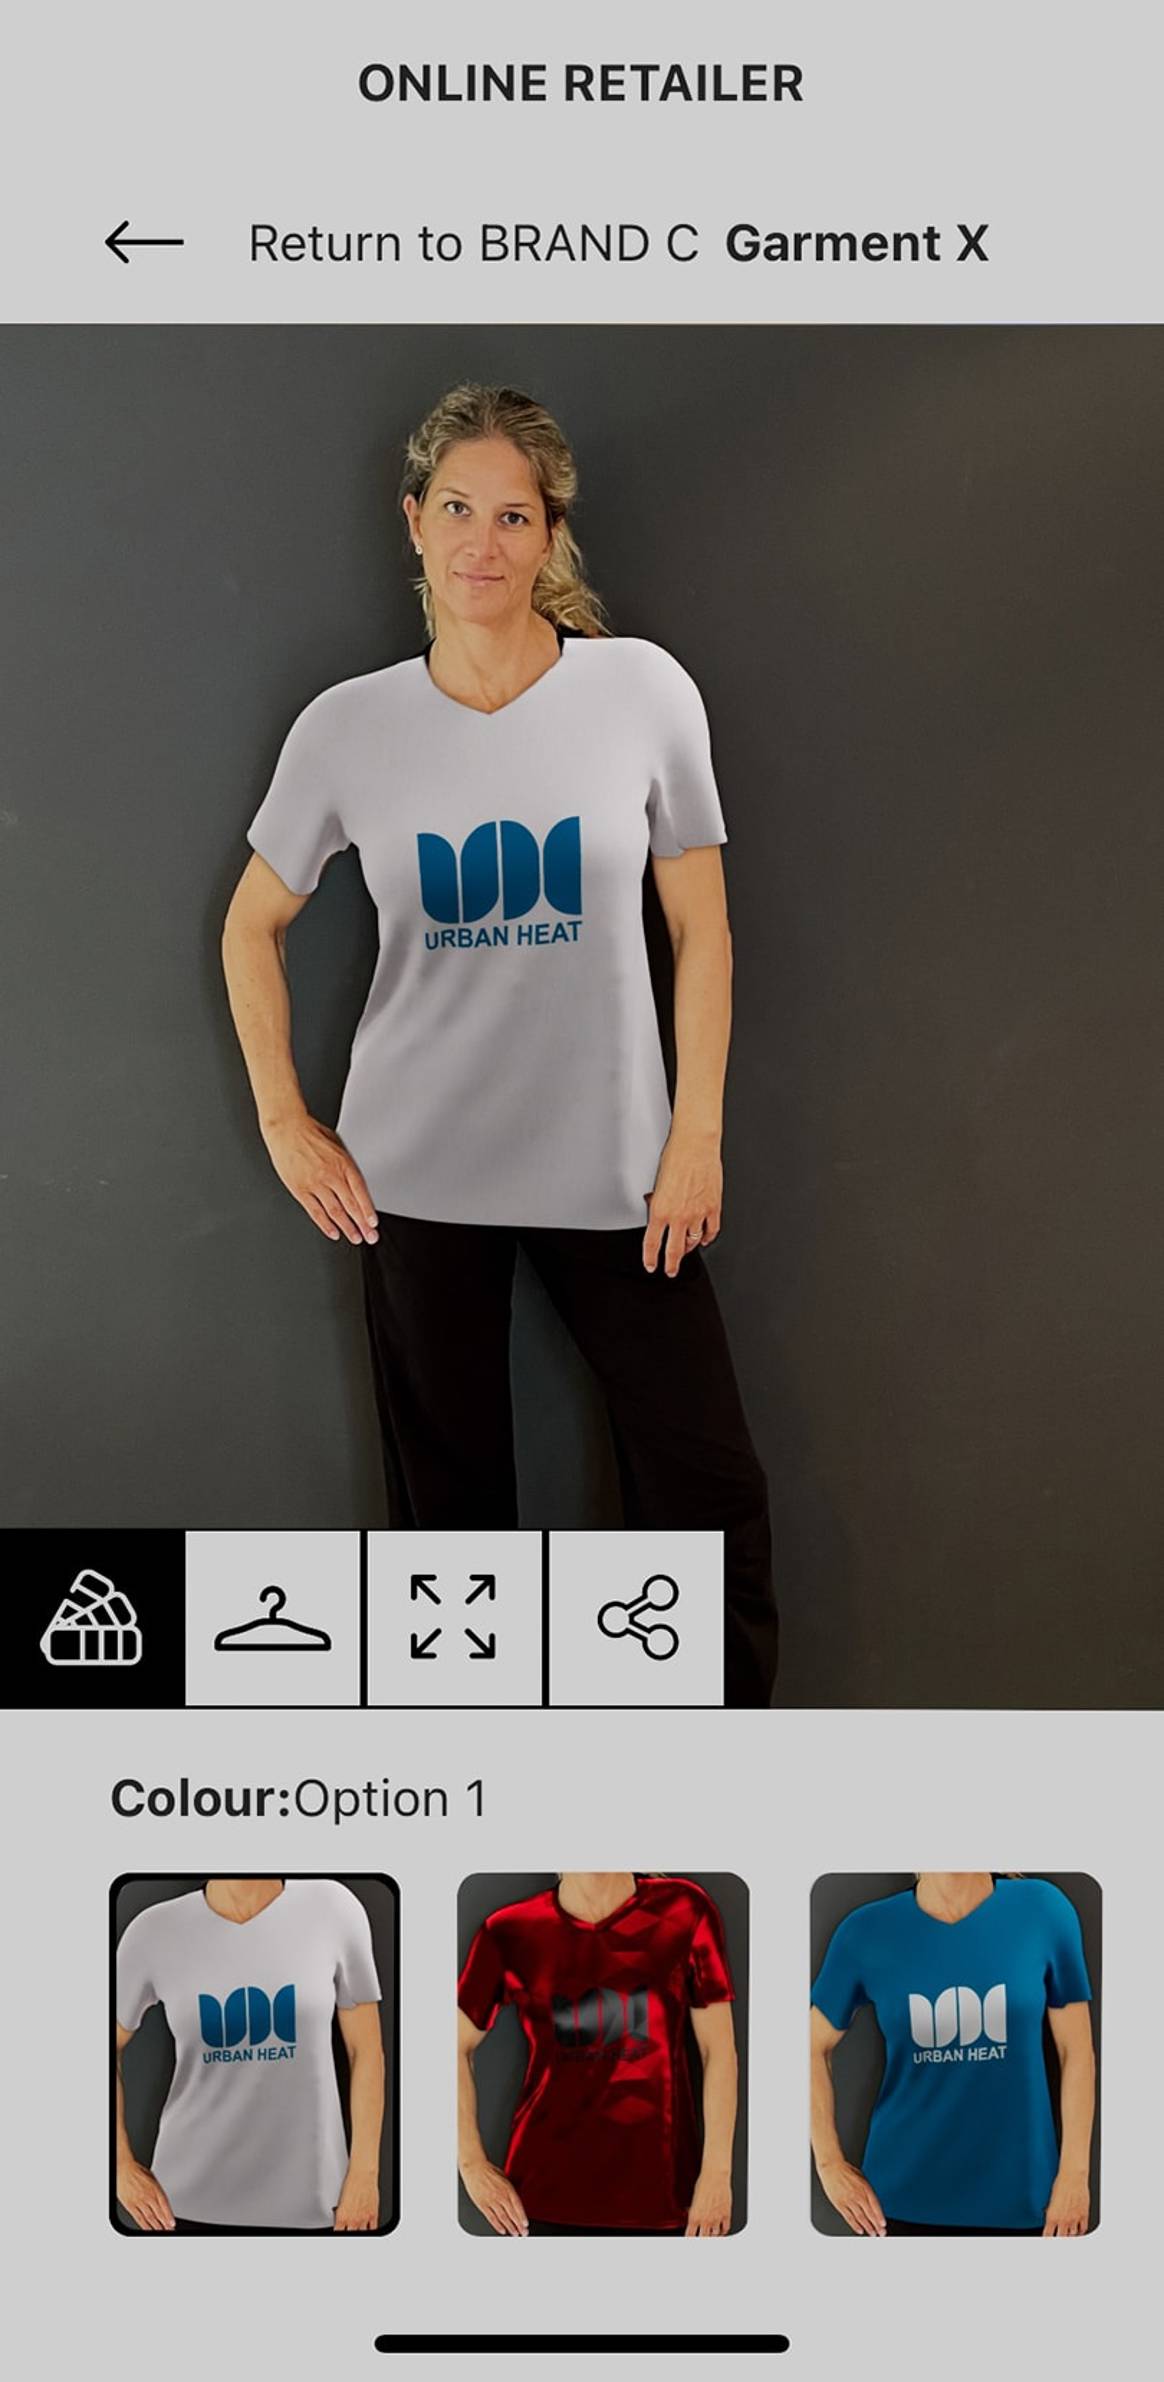 The potential to revolutionize the fashion and e-commerce industry-the first version of an app for virtual fitting from the Munich Startup URBAN HEAT